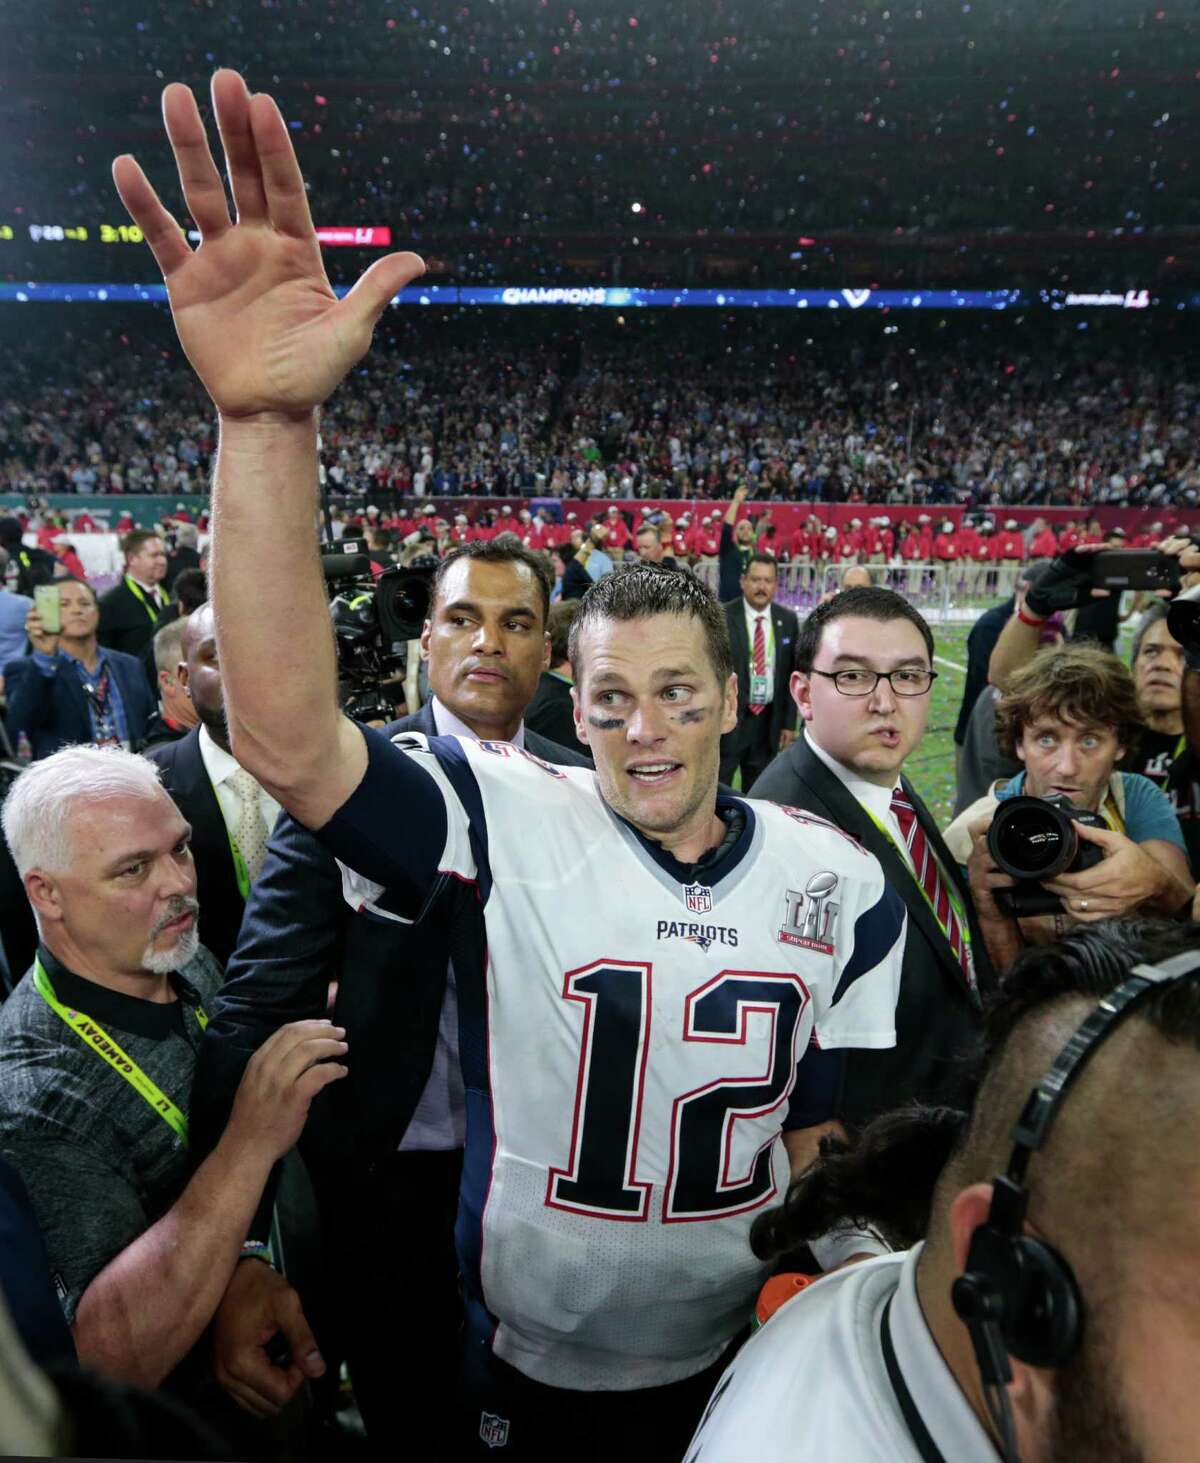 Report: Tom Brady jersey may not be stolen after all